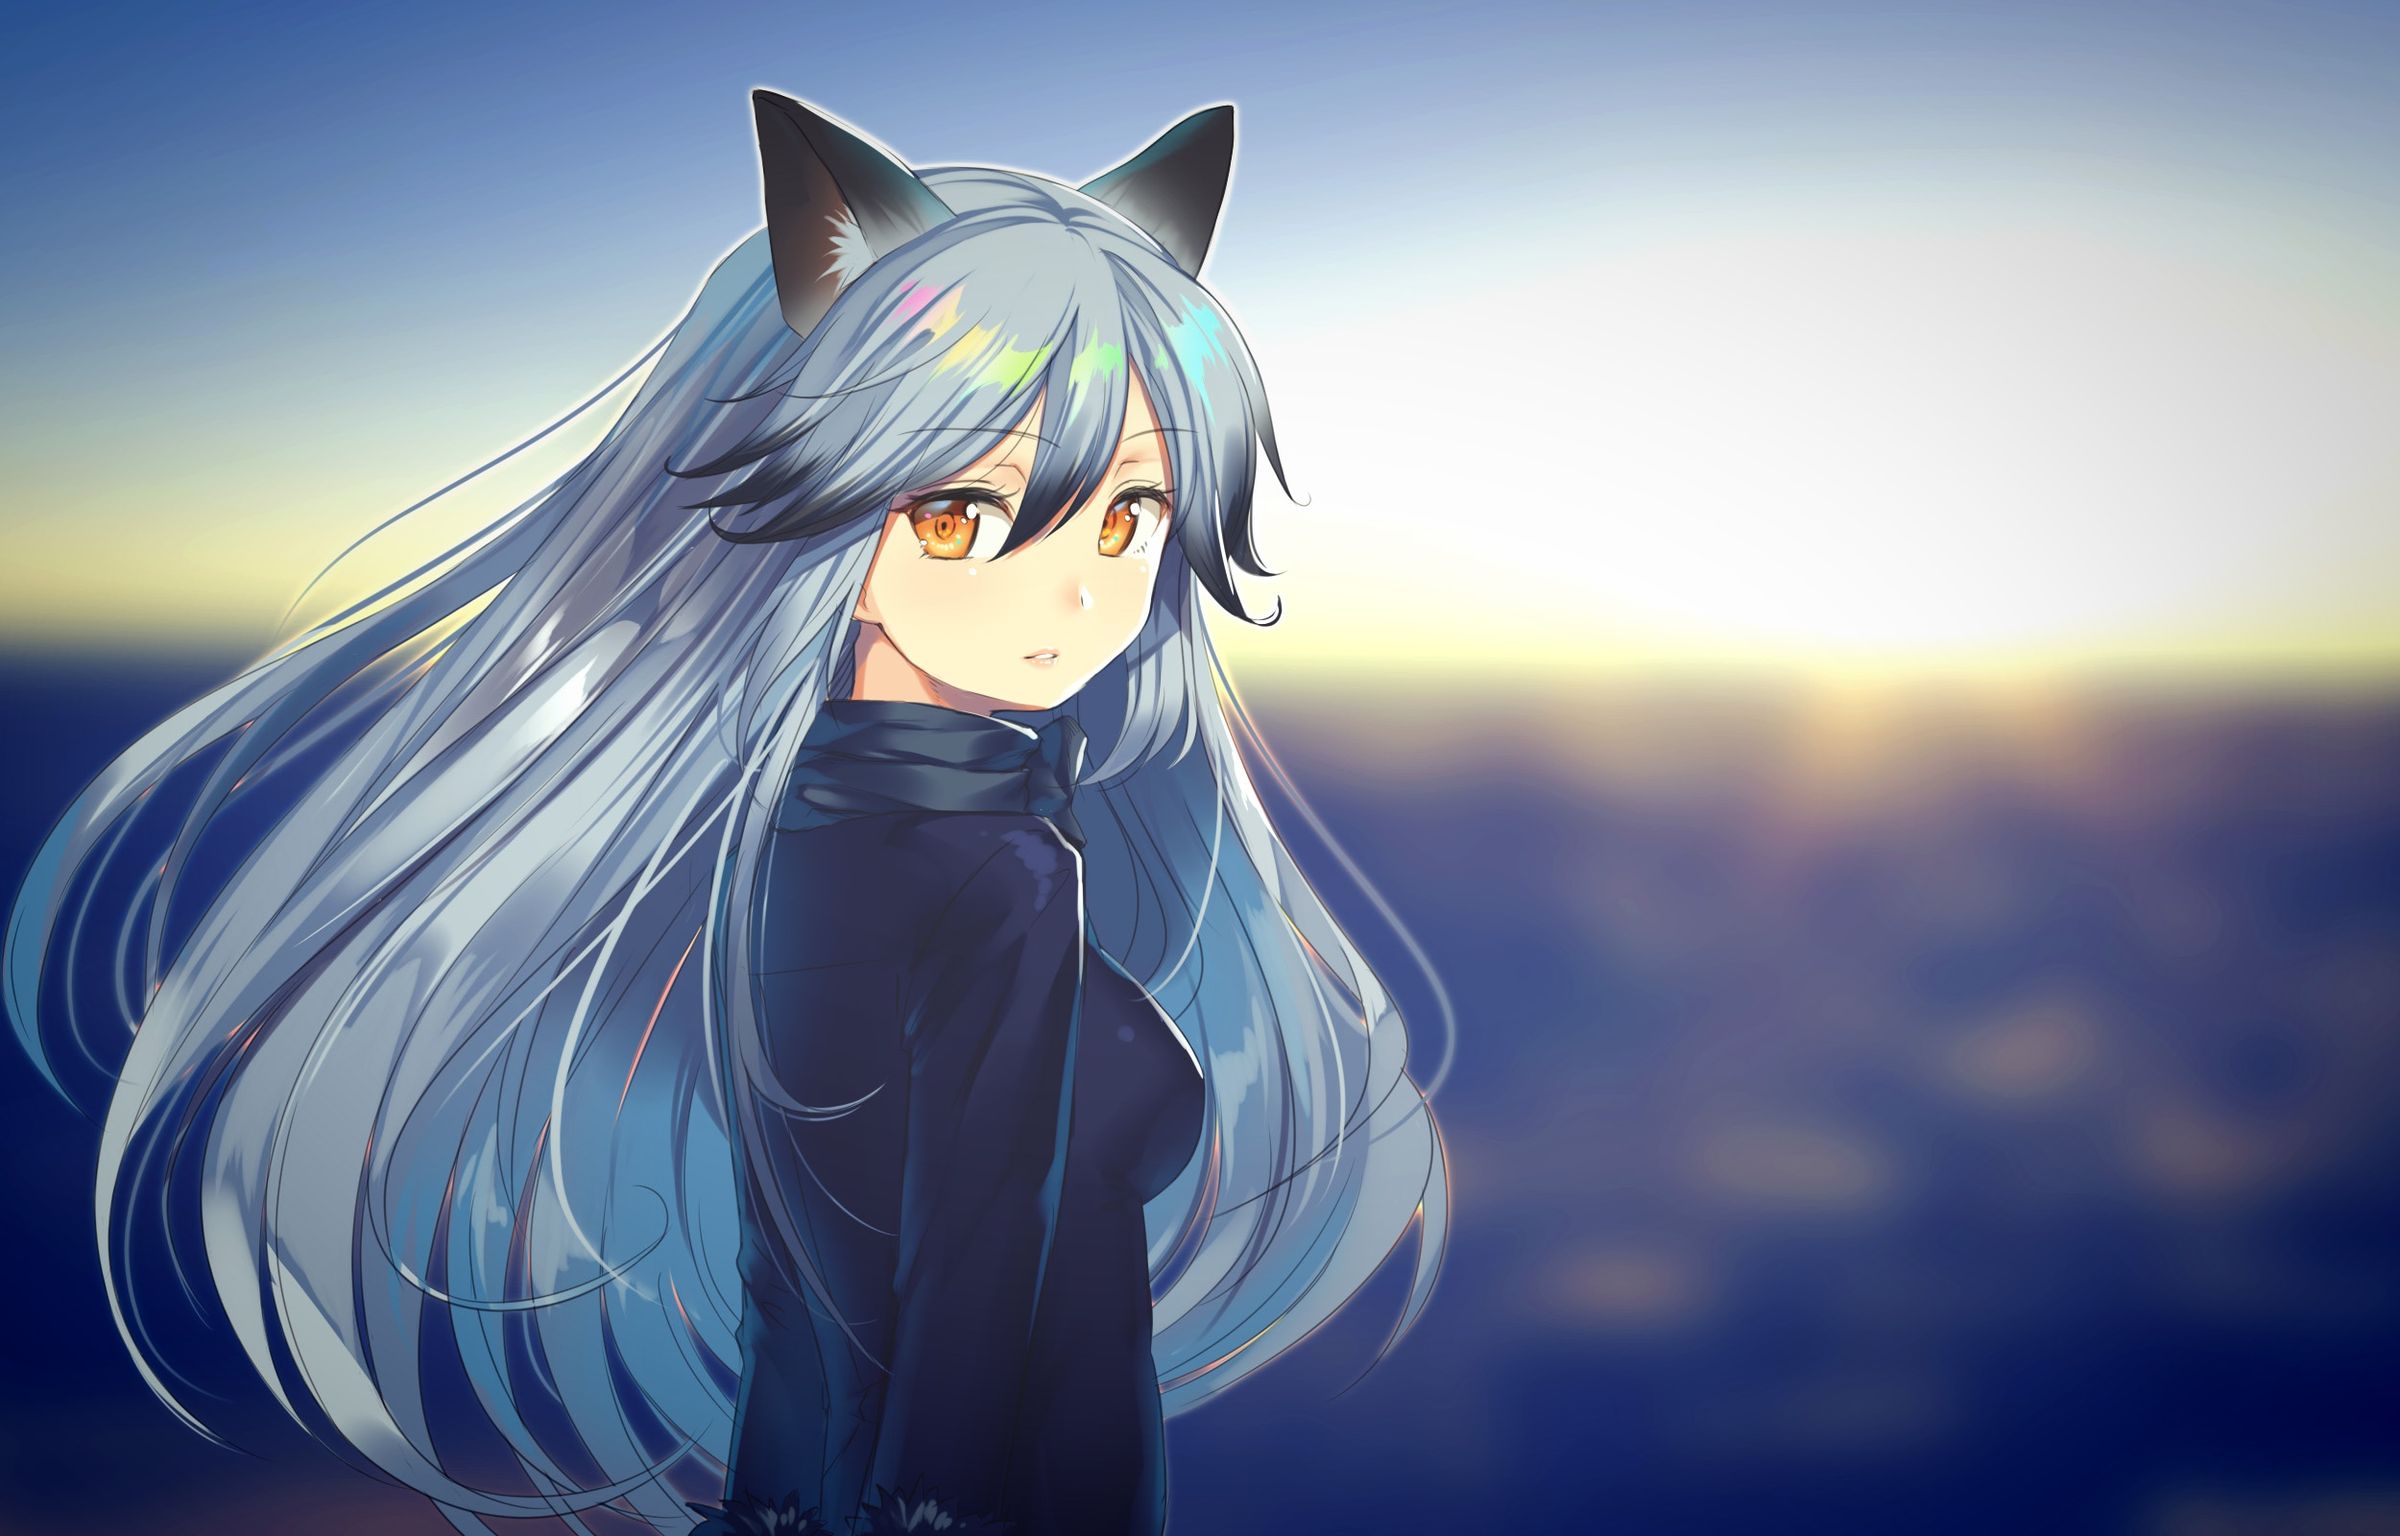 Blue Haired Fox Girl - Anime Characters Database - wide 10